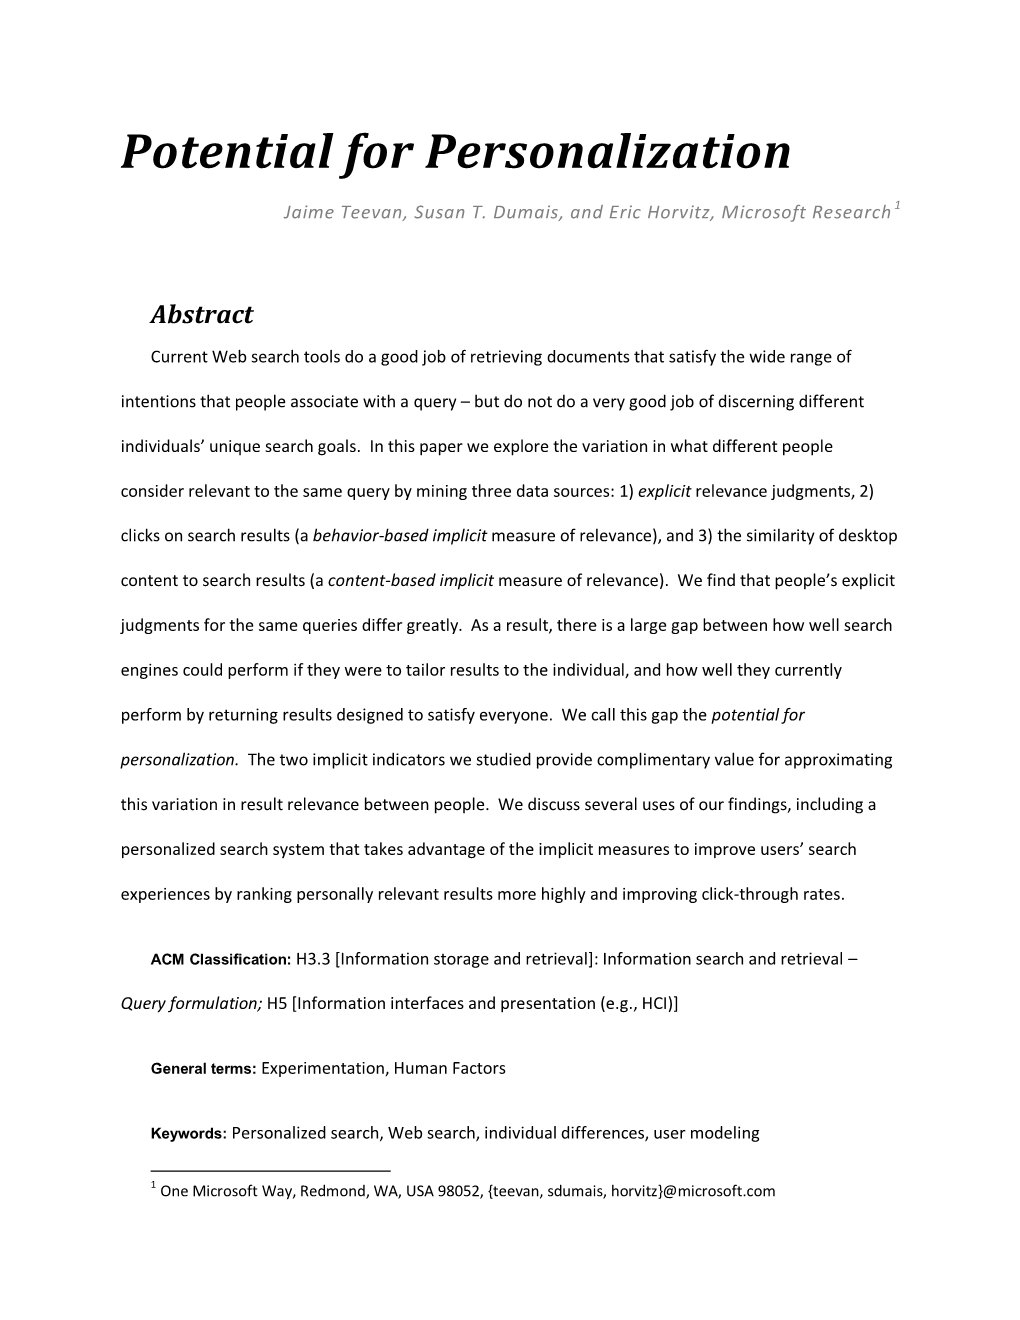 Personalizing Search When Personalization Is Valuable